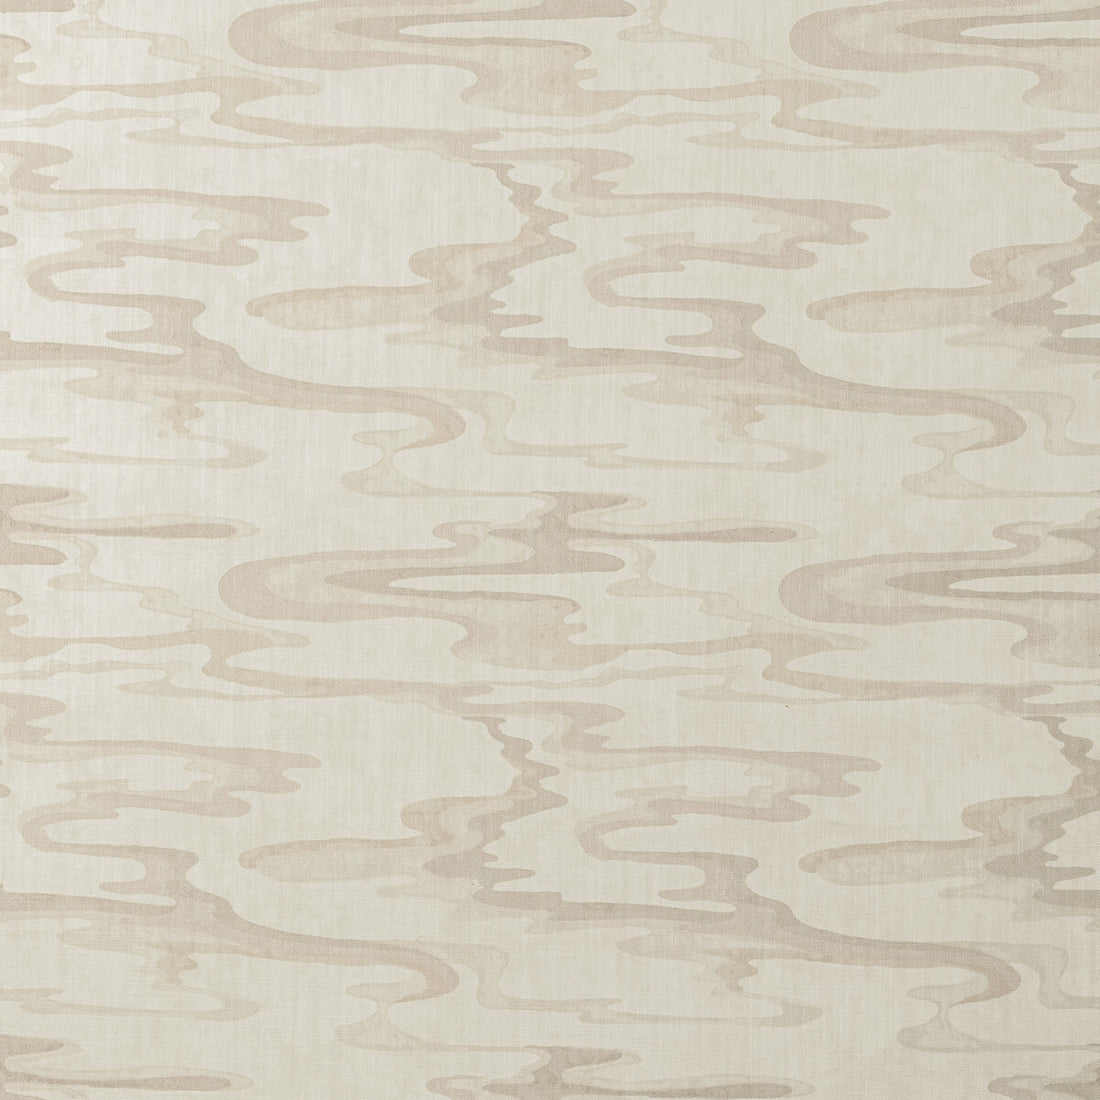 Dreamland fabric in cameo color - pattern DREAMLAND.16.0 - by Kravet Basics in the Candice Olson collection